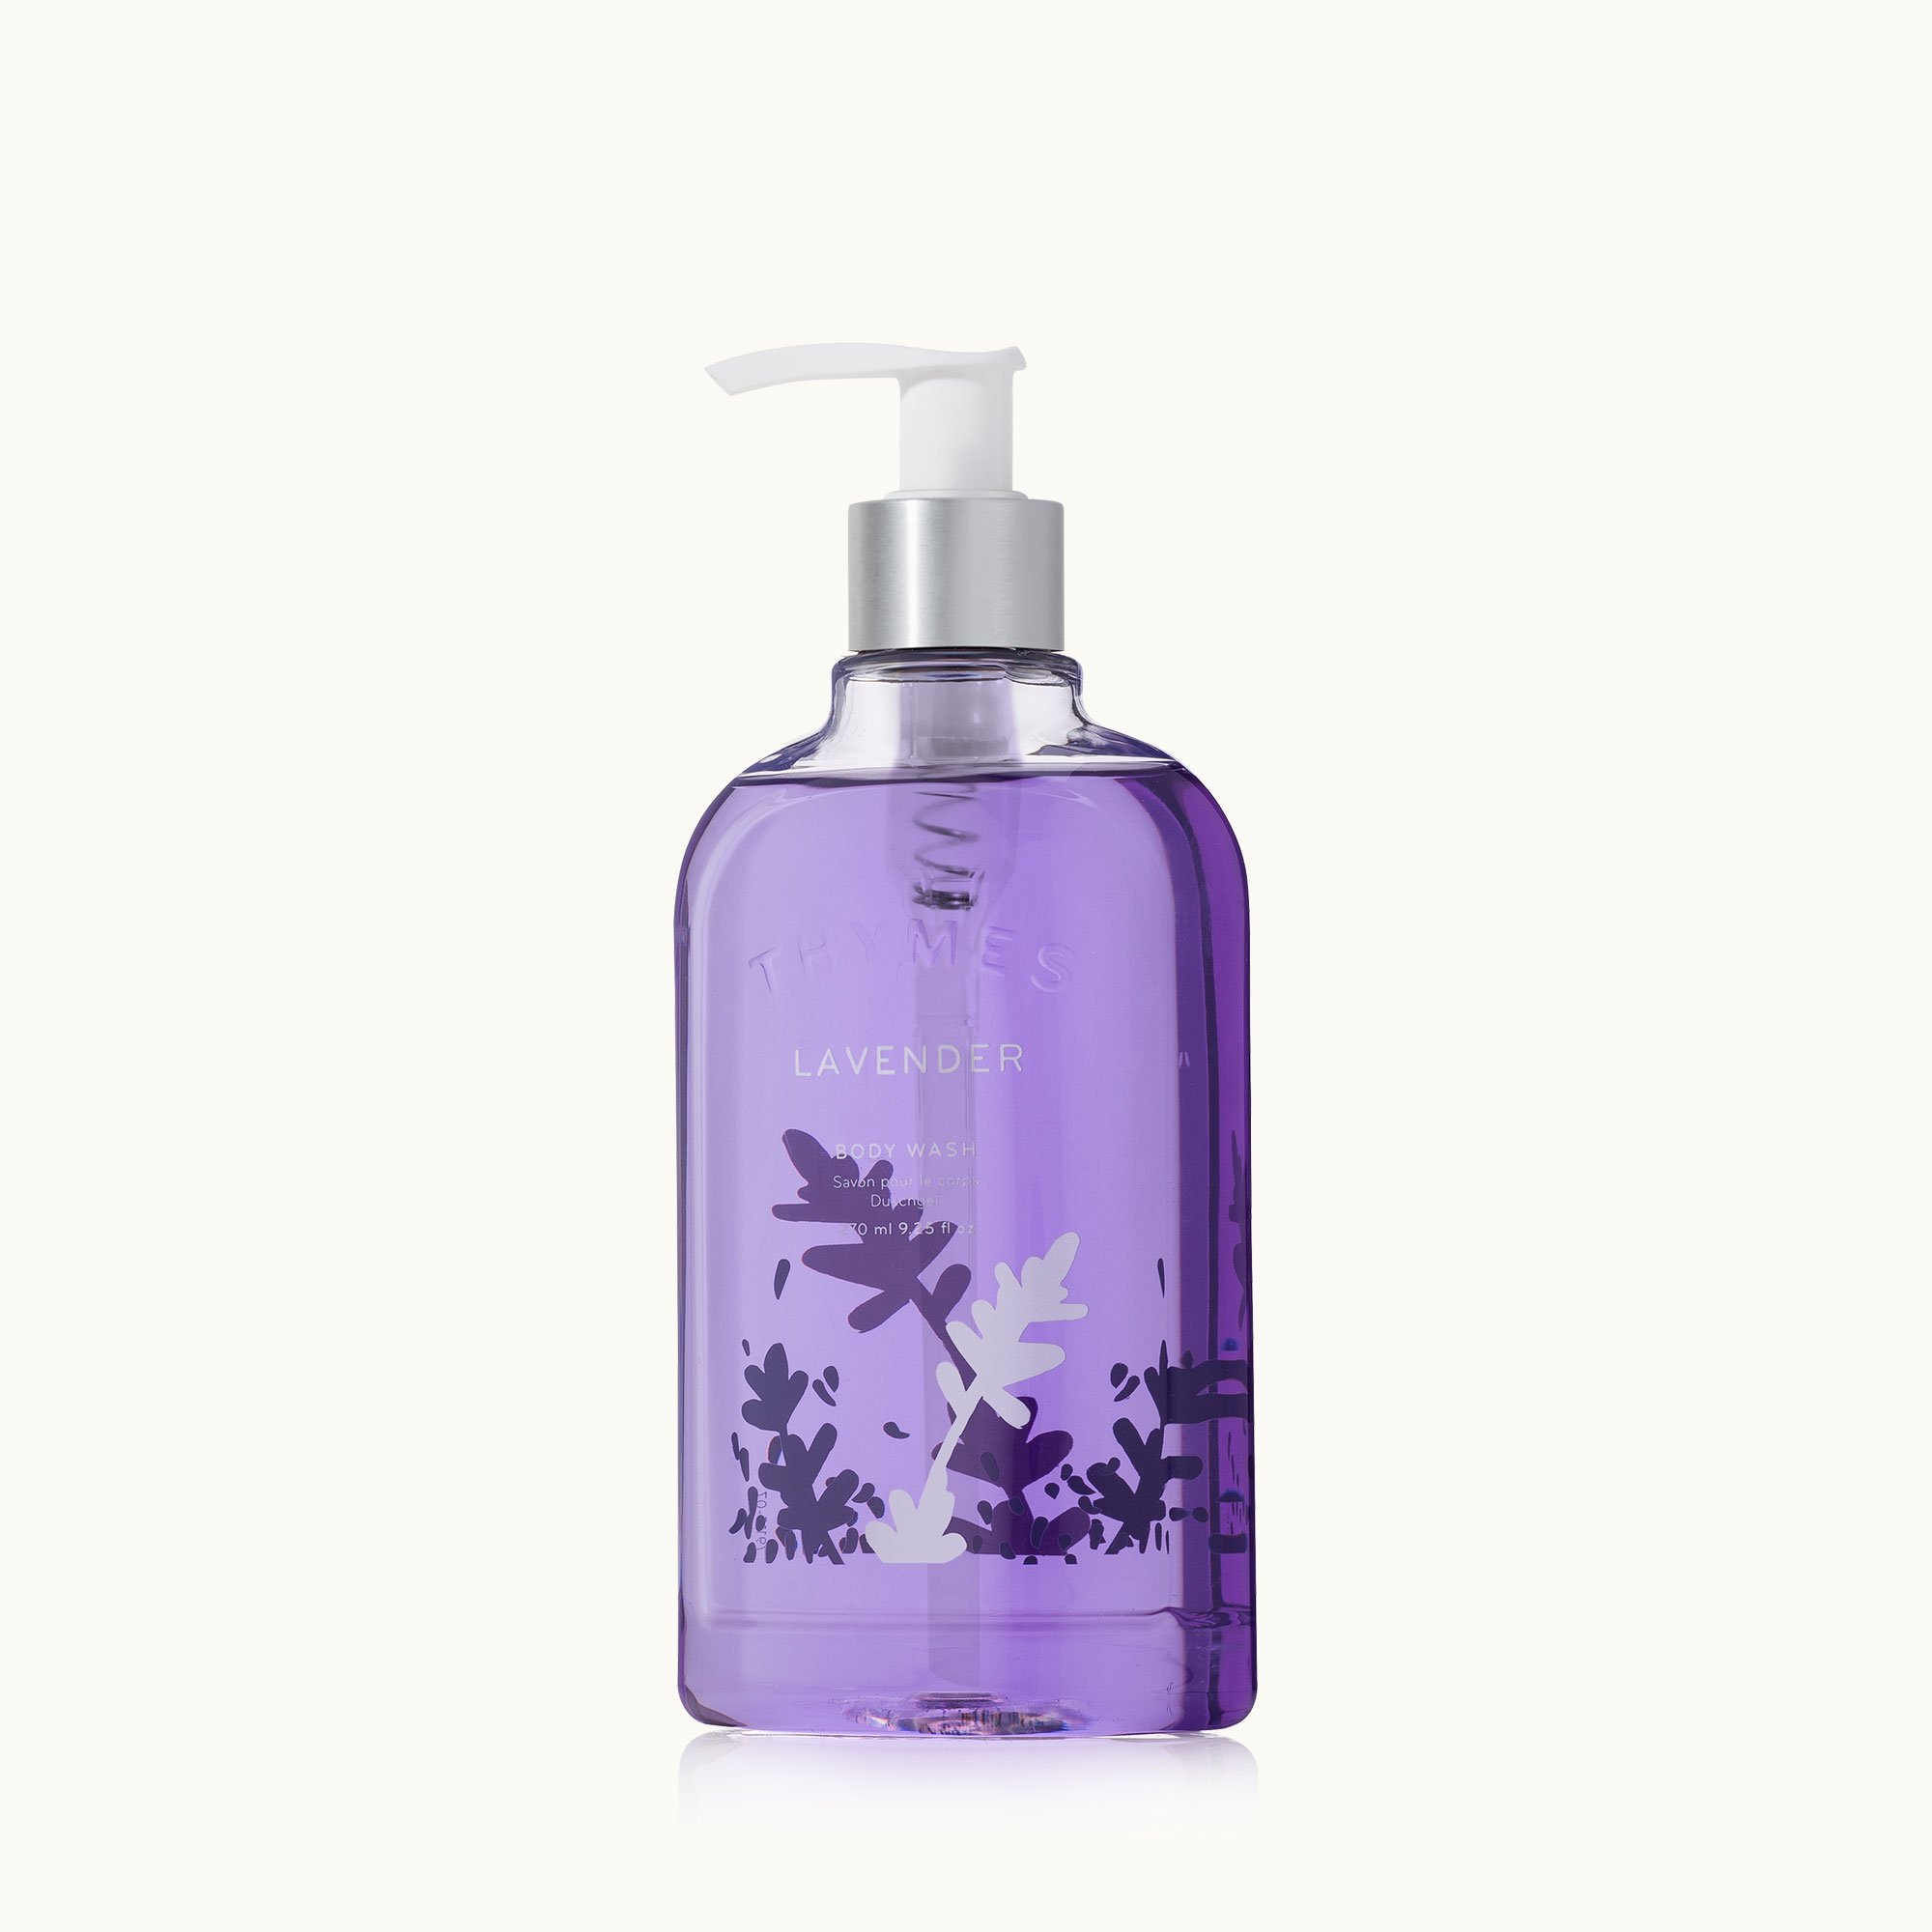 Thymes Body Lotion, Lavender, 9.25-Ounce Bottle 